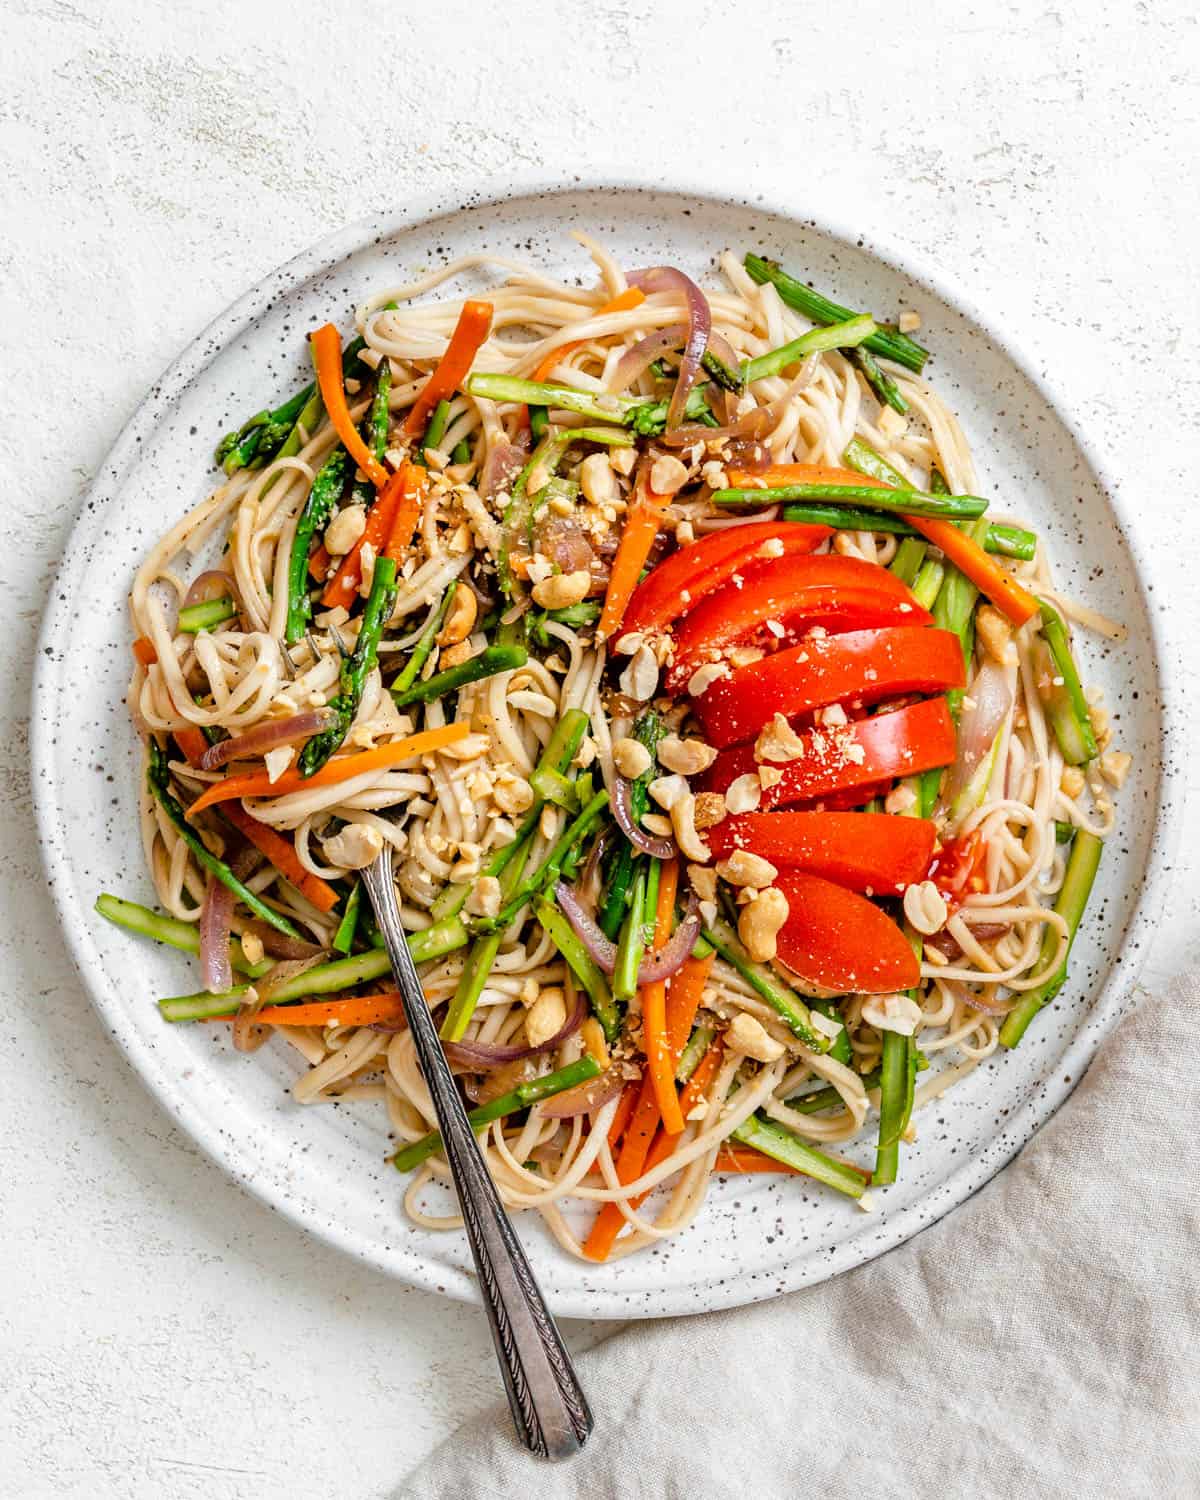 completed Vegetable Noodle Stir Fry in a plate